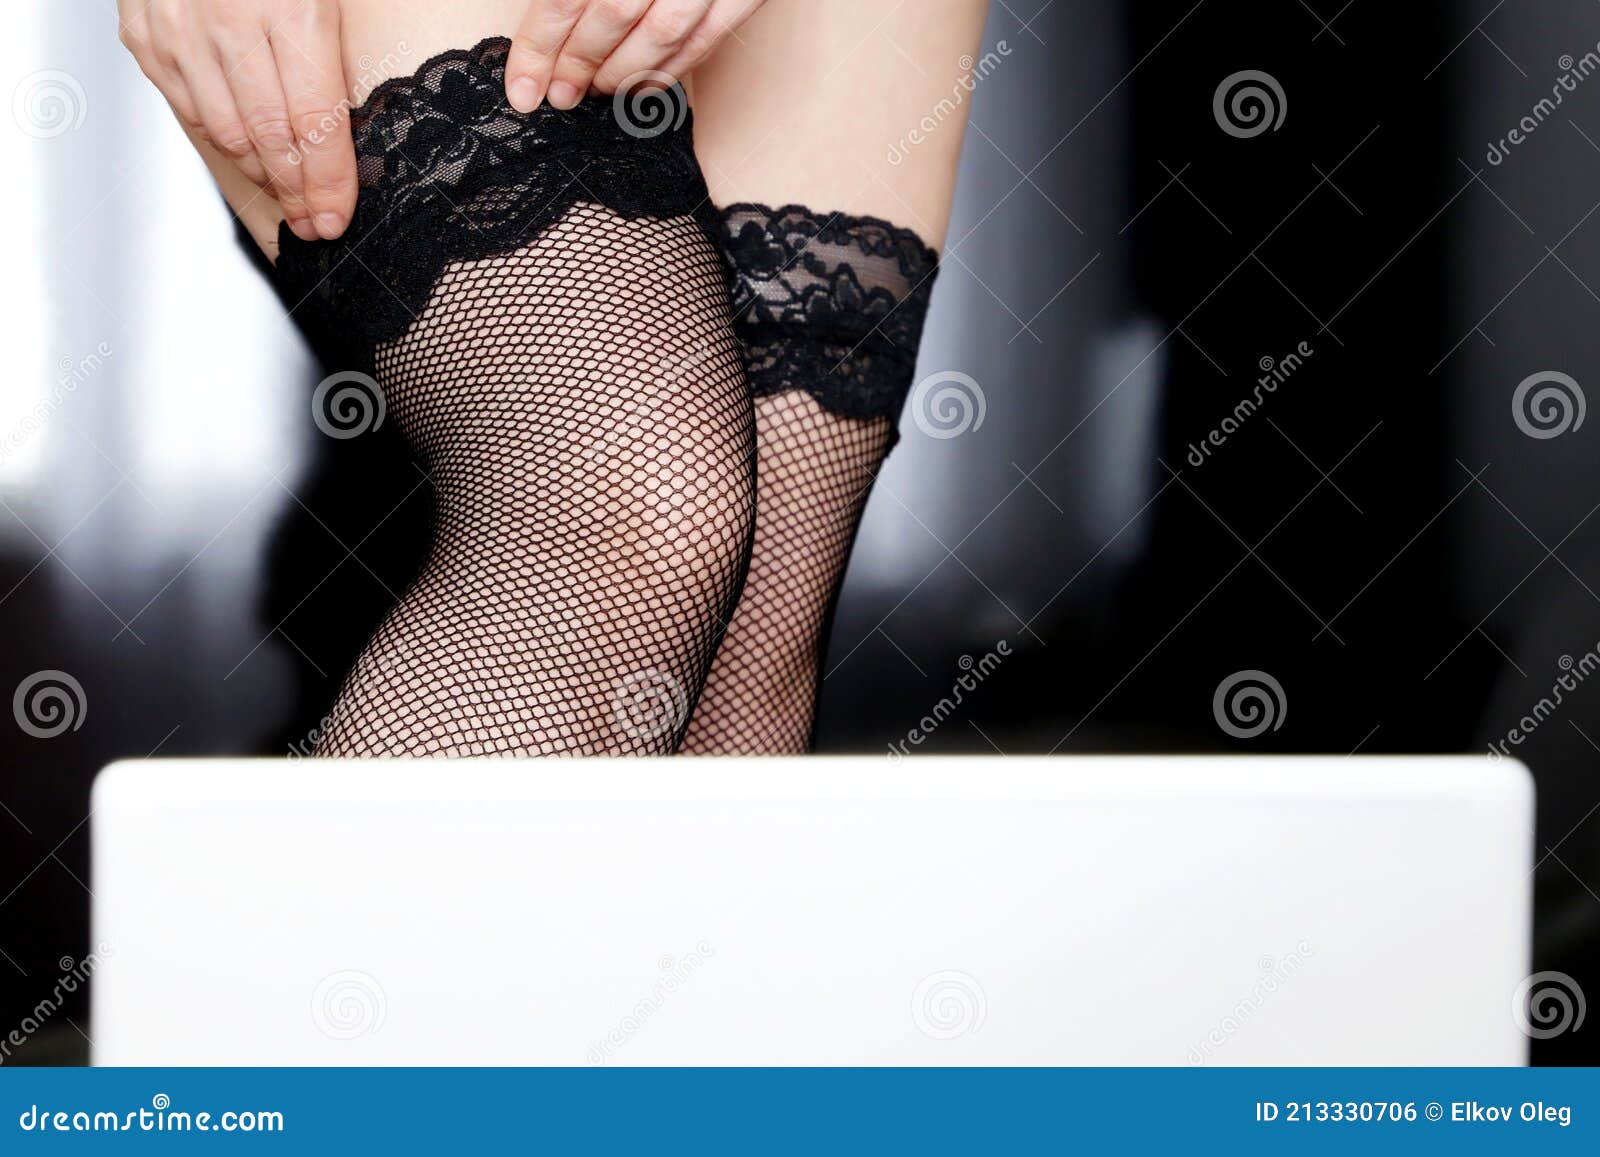 Hot Woman in Black Fishnet Stockings Posing in Front of Laptop Webcam Stock  Photo - Image of laptop, model: 213330706